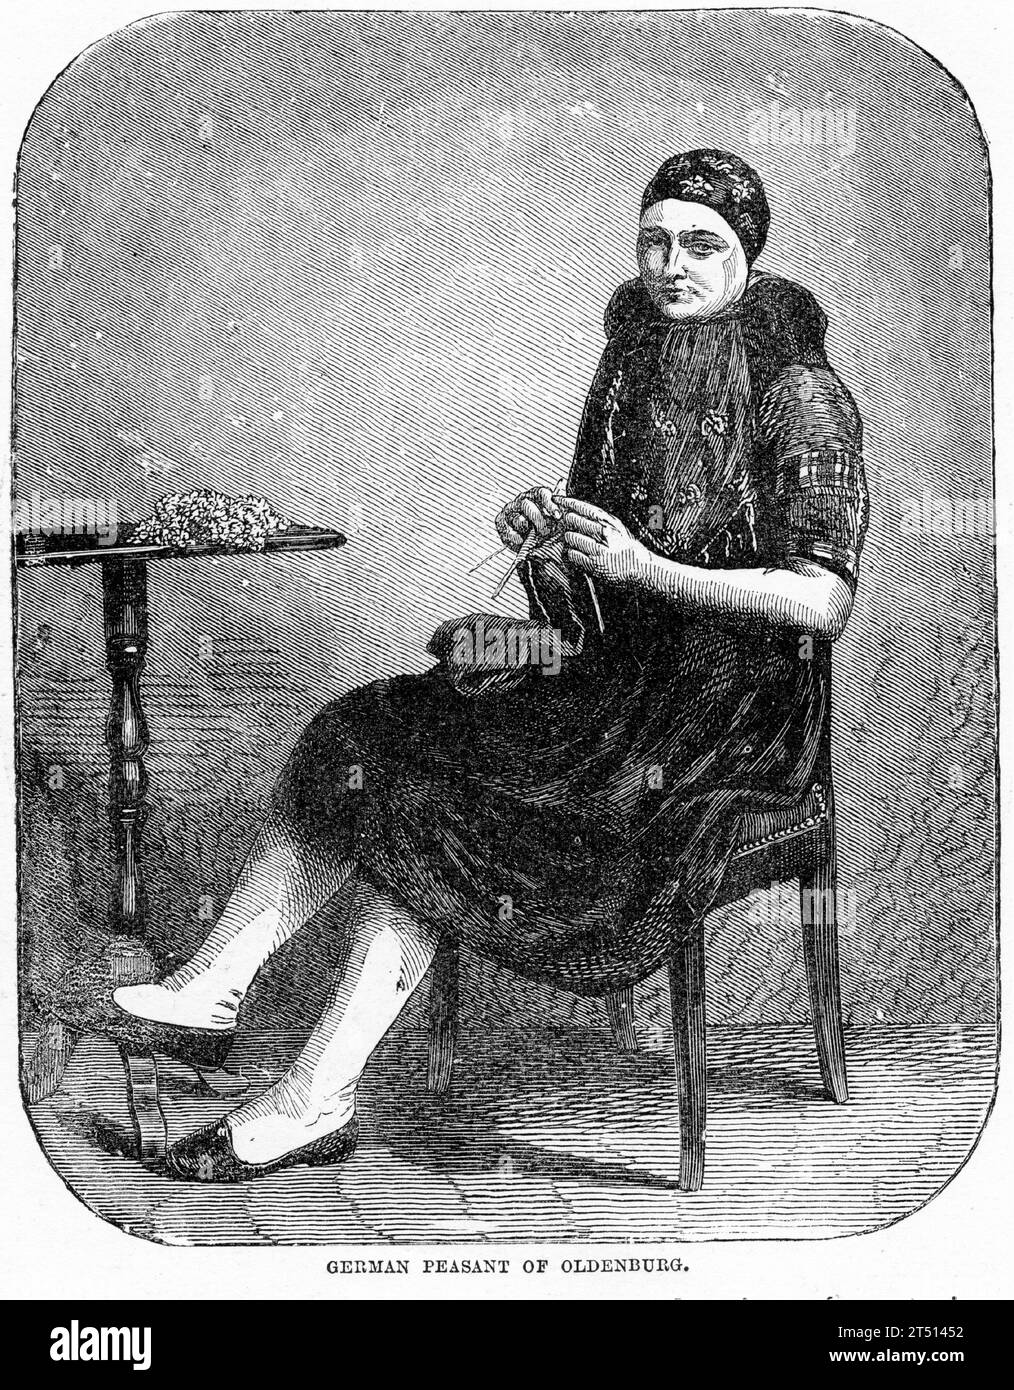 Engraved portrait of a female German peasant from Oldenburg knitting in a chair. Published circa 1887 Stock Photo